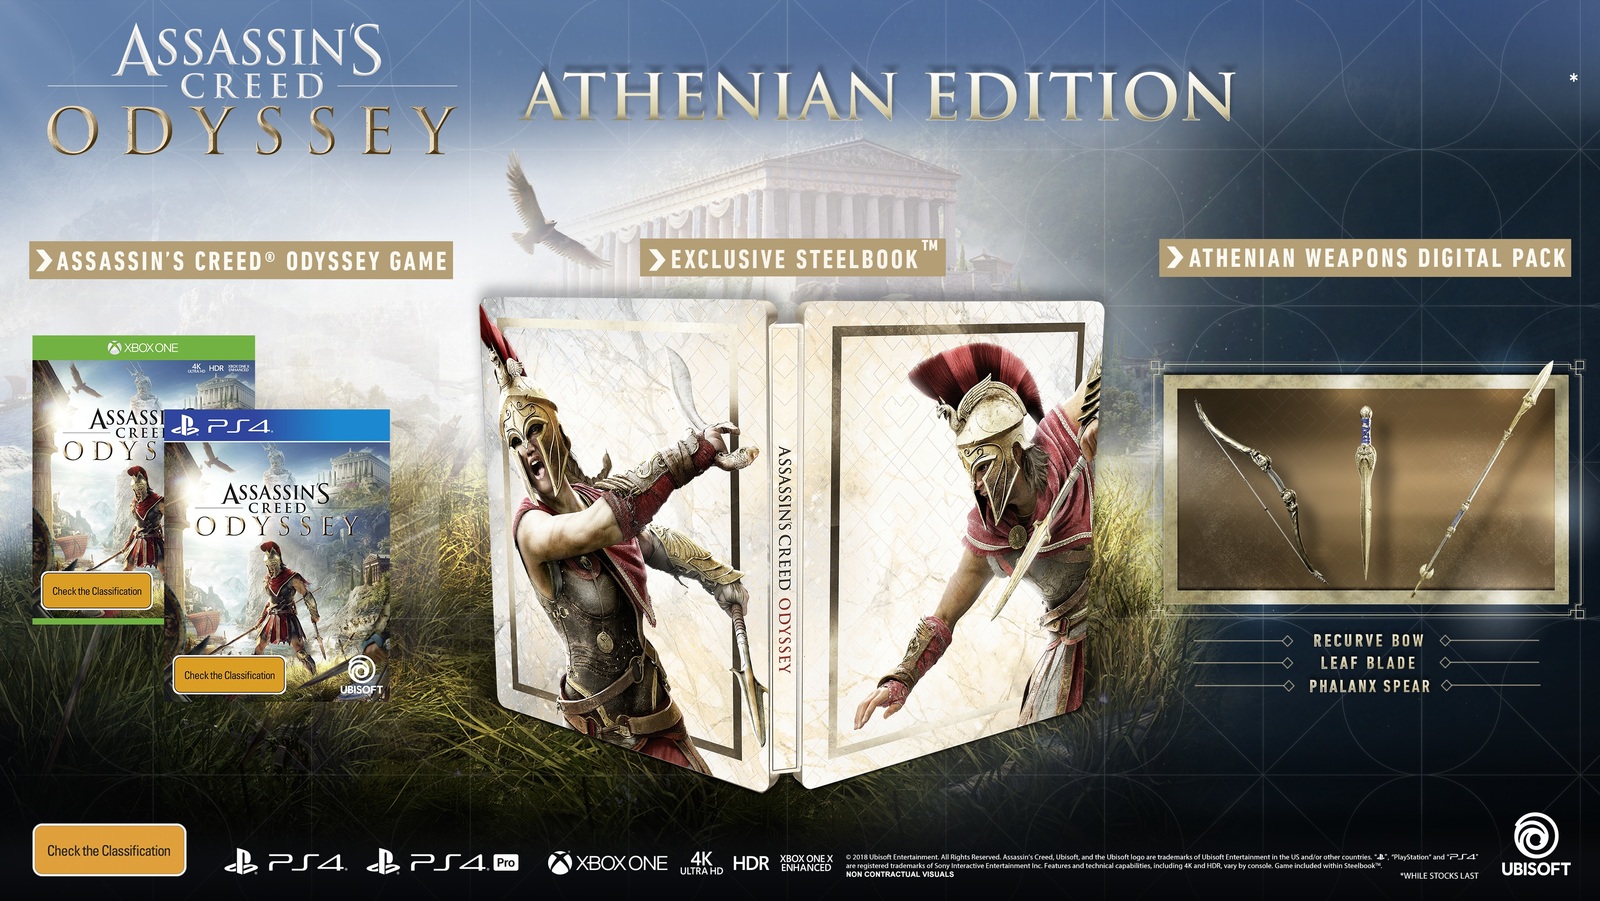 Assassin s creed odyssey editions. Assassin's Creed Odyssey Gold Edition ps4. Стилбук Assassins Creed Odyssey. Assassins Creed Odyssey Collectors Edition. Assassins Creed Odyssey Gold Edition Steelbook ps4.